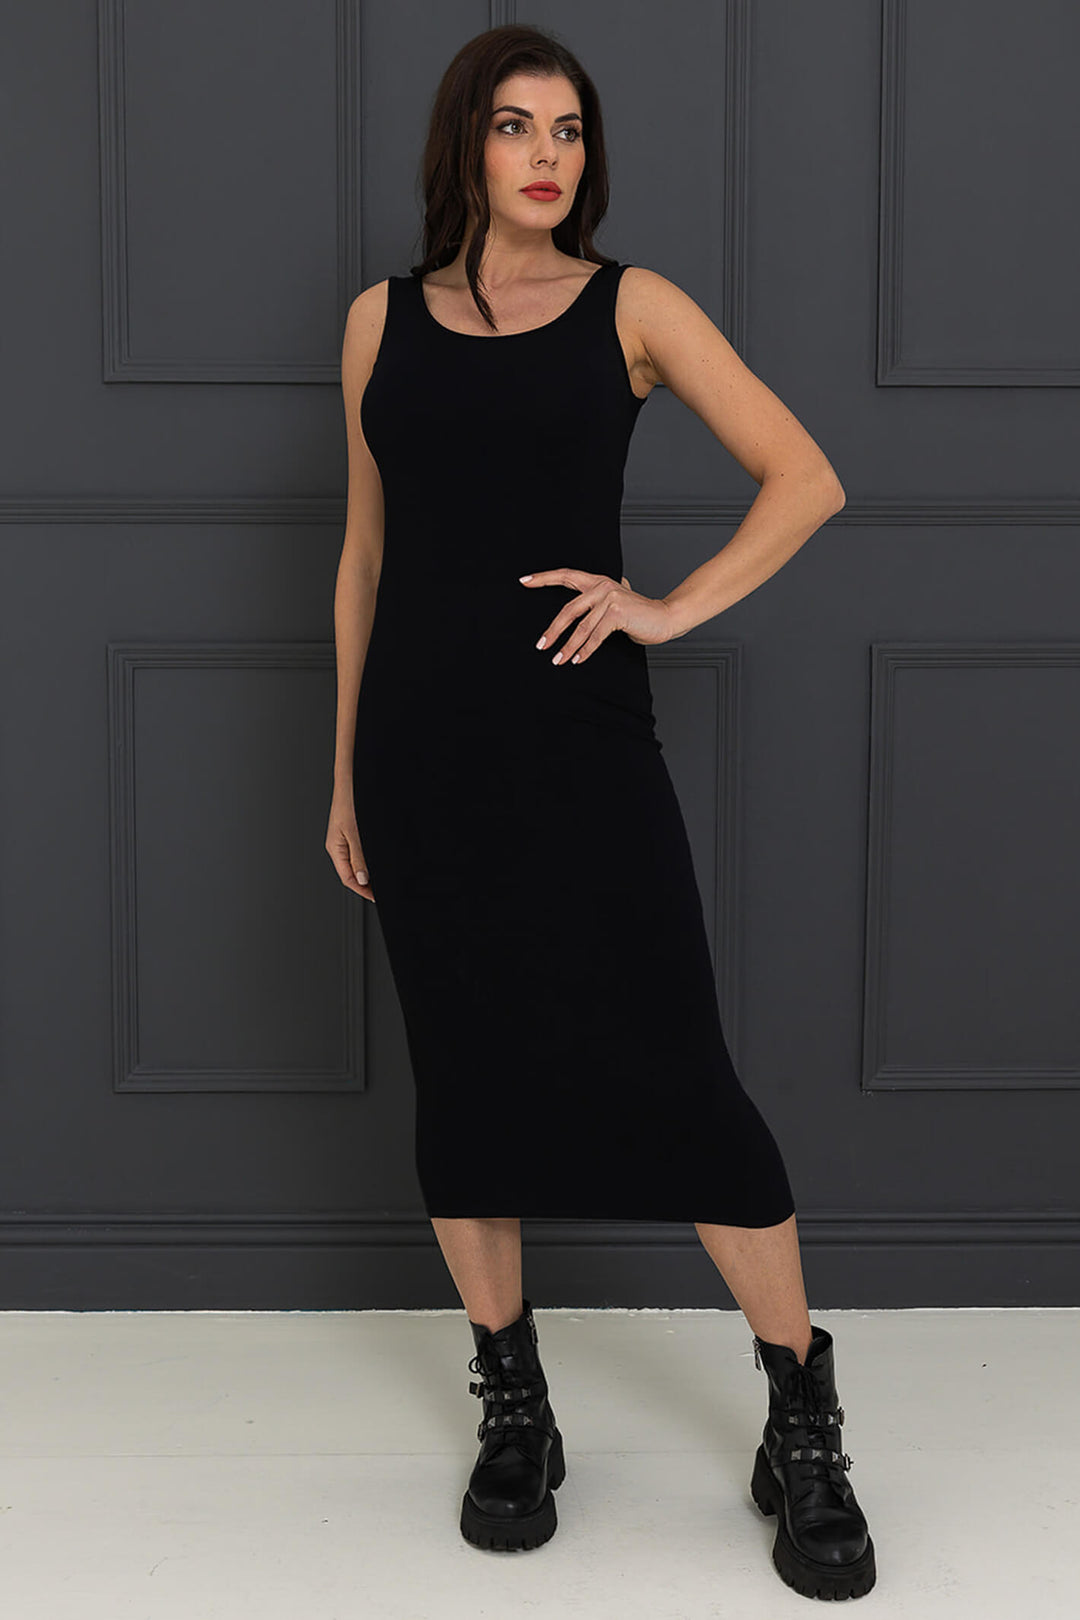 A Postcard From Brighton Nancee Black Sleeveless Midaxi Dress - Experience Boutique